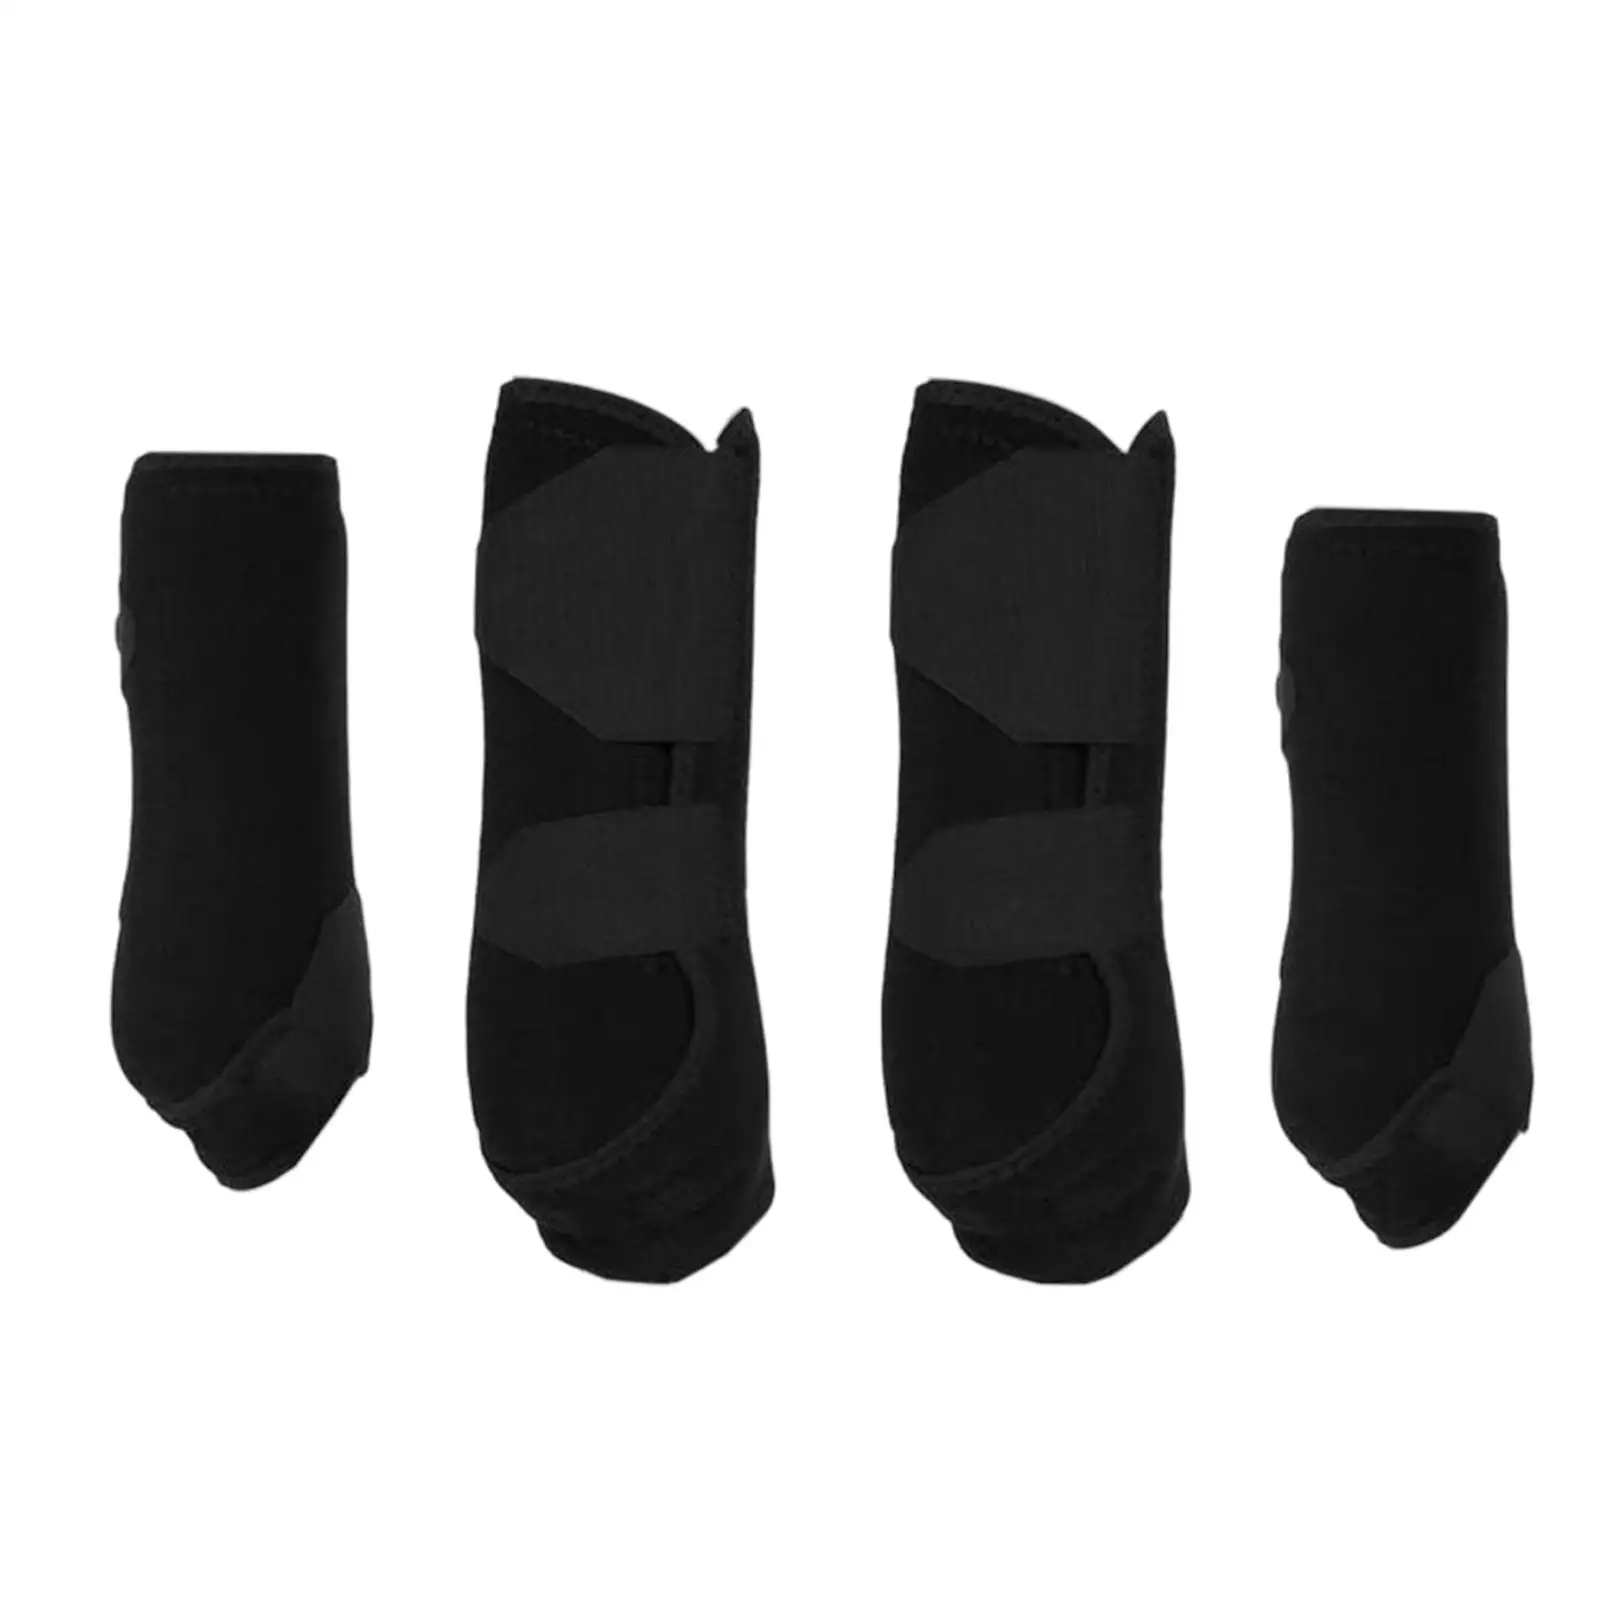 4x Horse Boots Leg Wraps Protector Front Hind Legs Guard for Equestrian Accessories